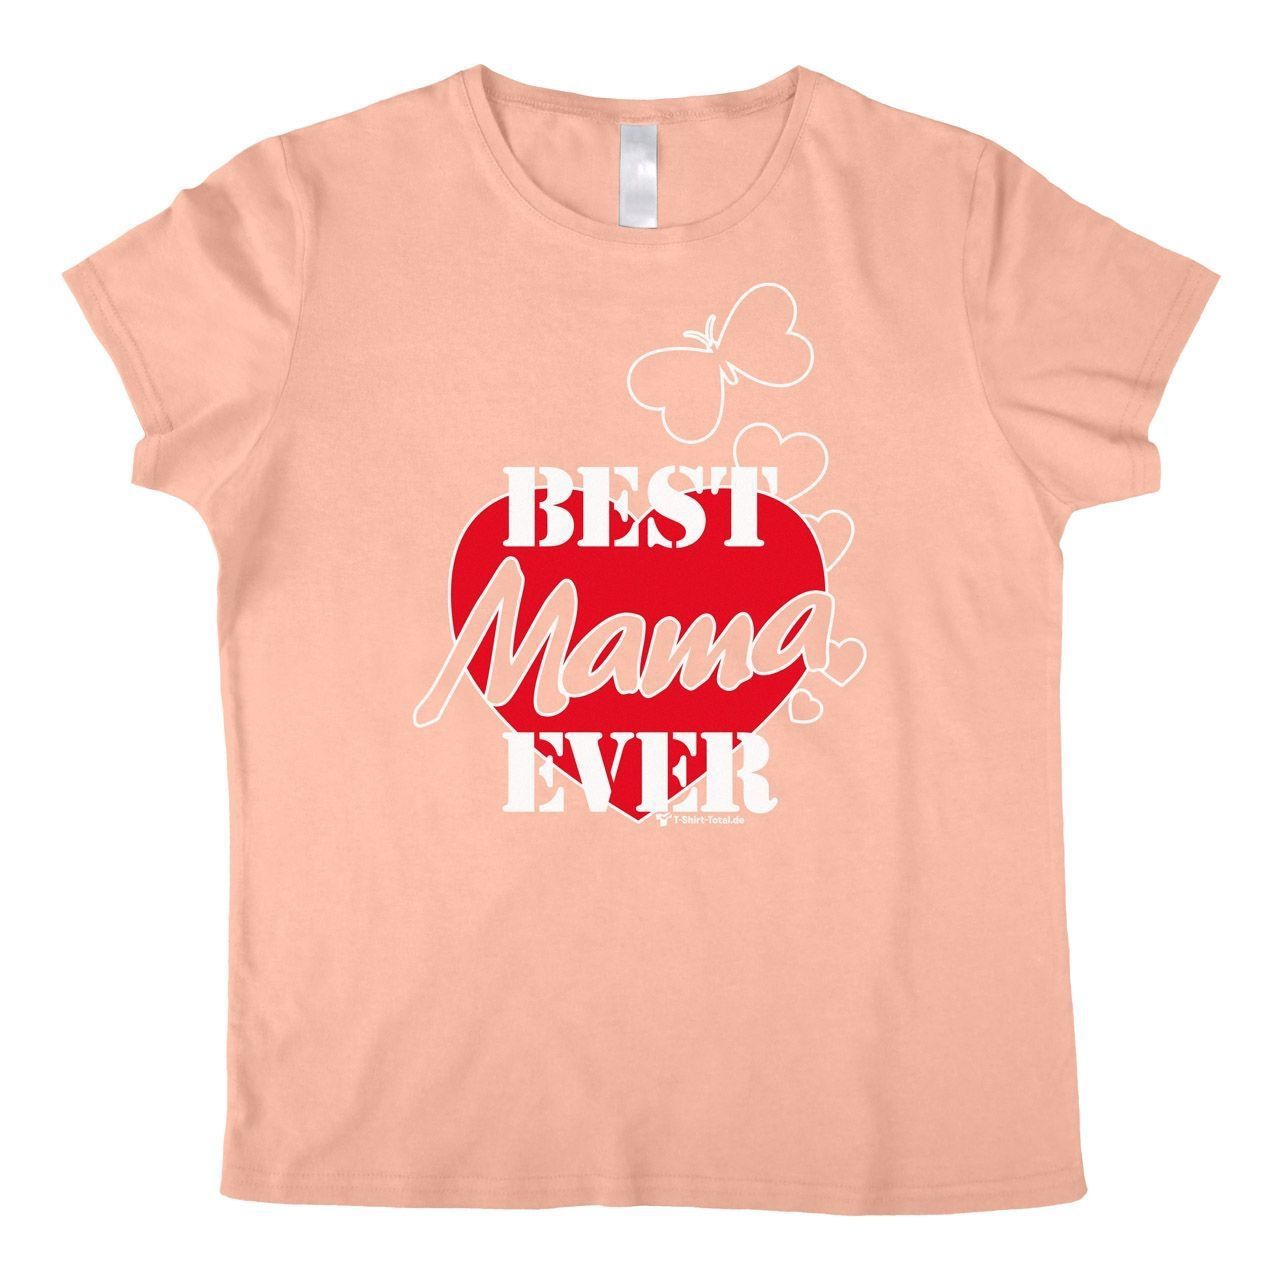 Best Mama ever Woman T-Shirt rosa Extra Large